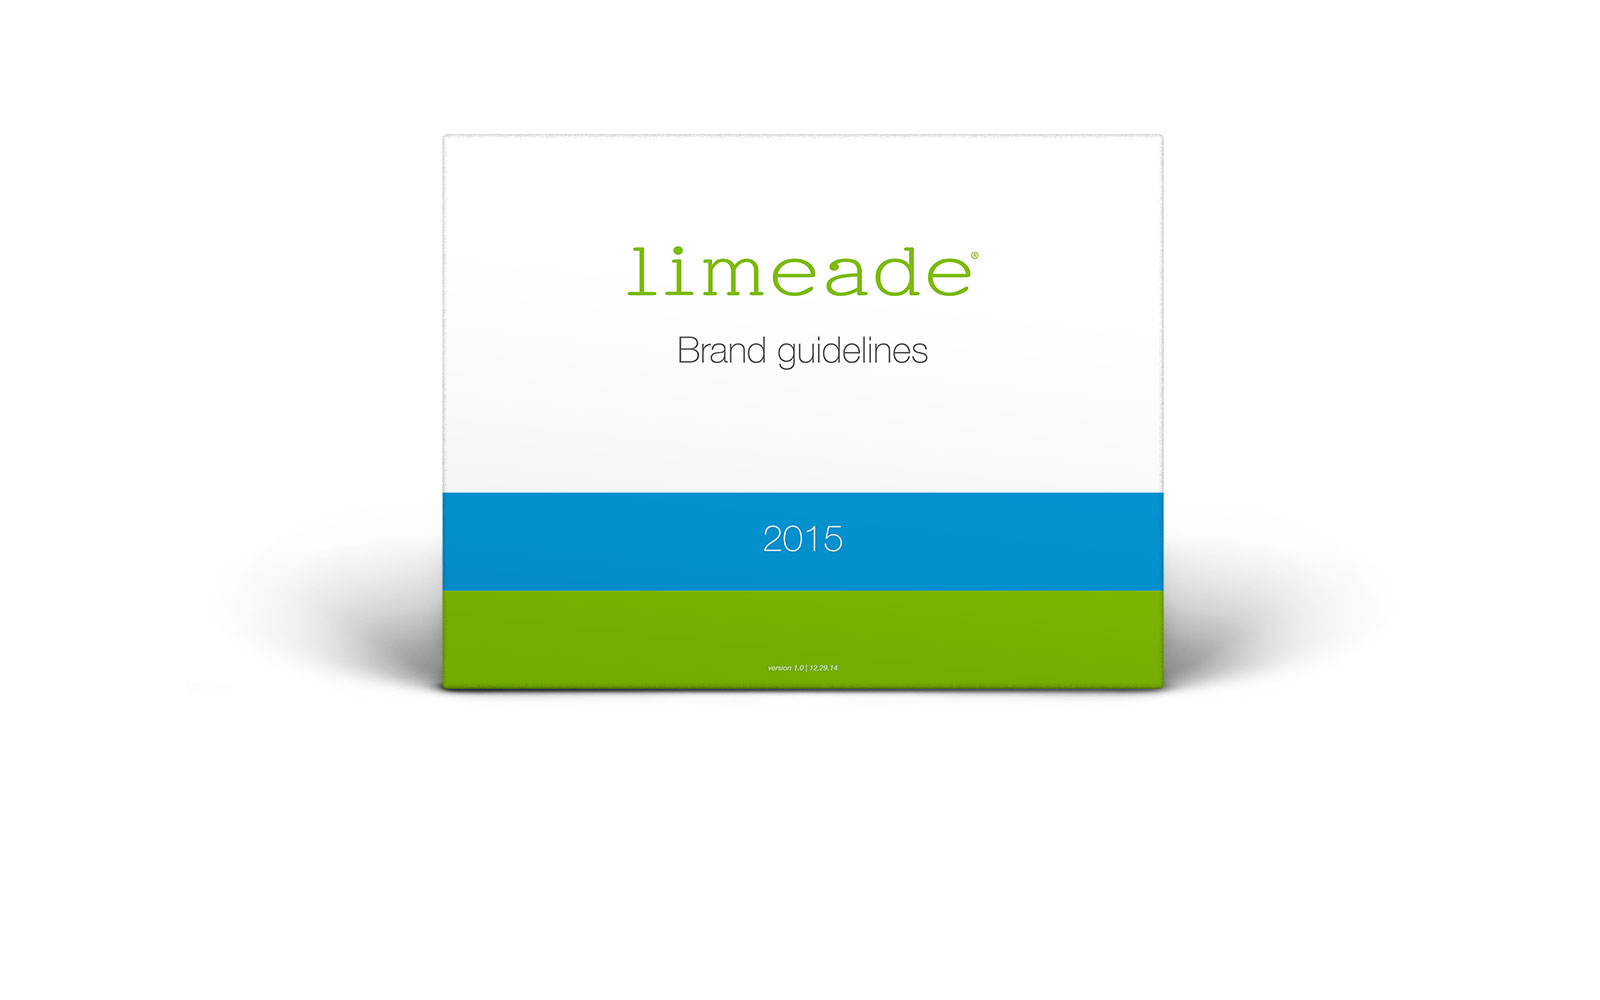 Limeade brand guidelines